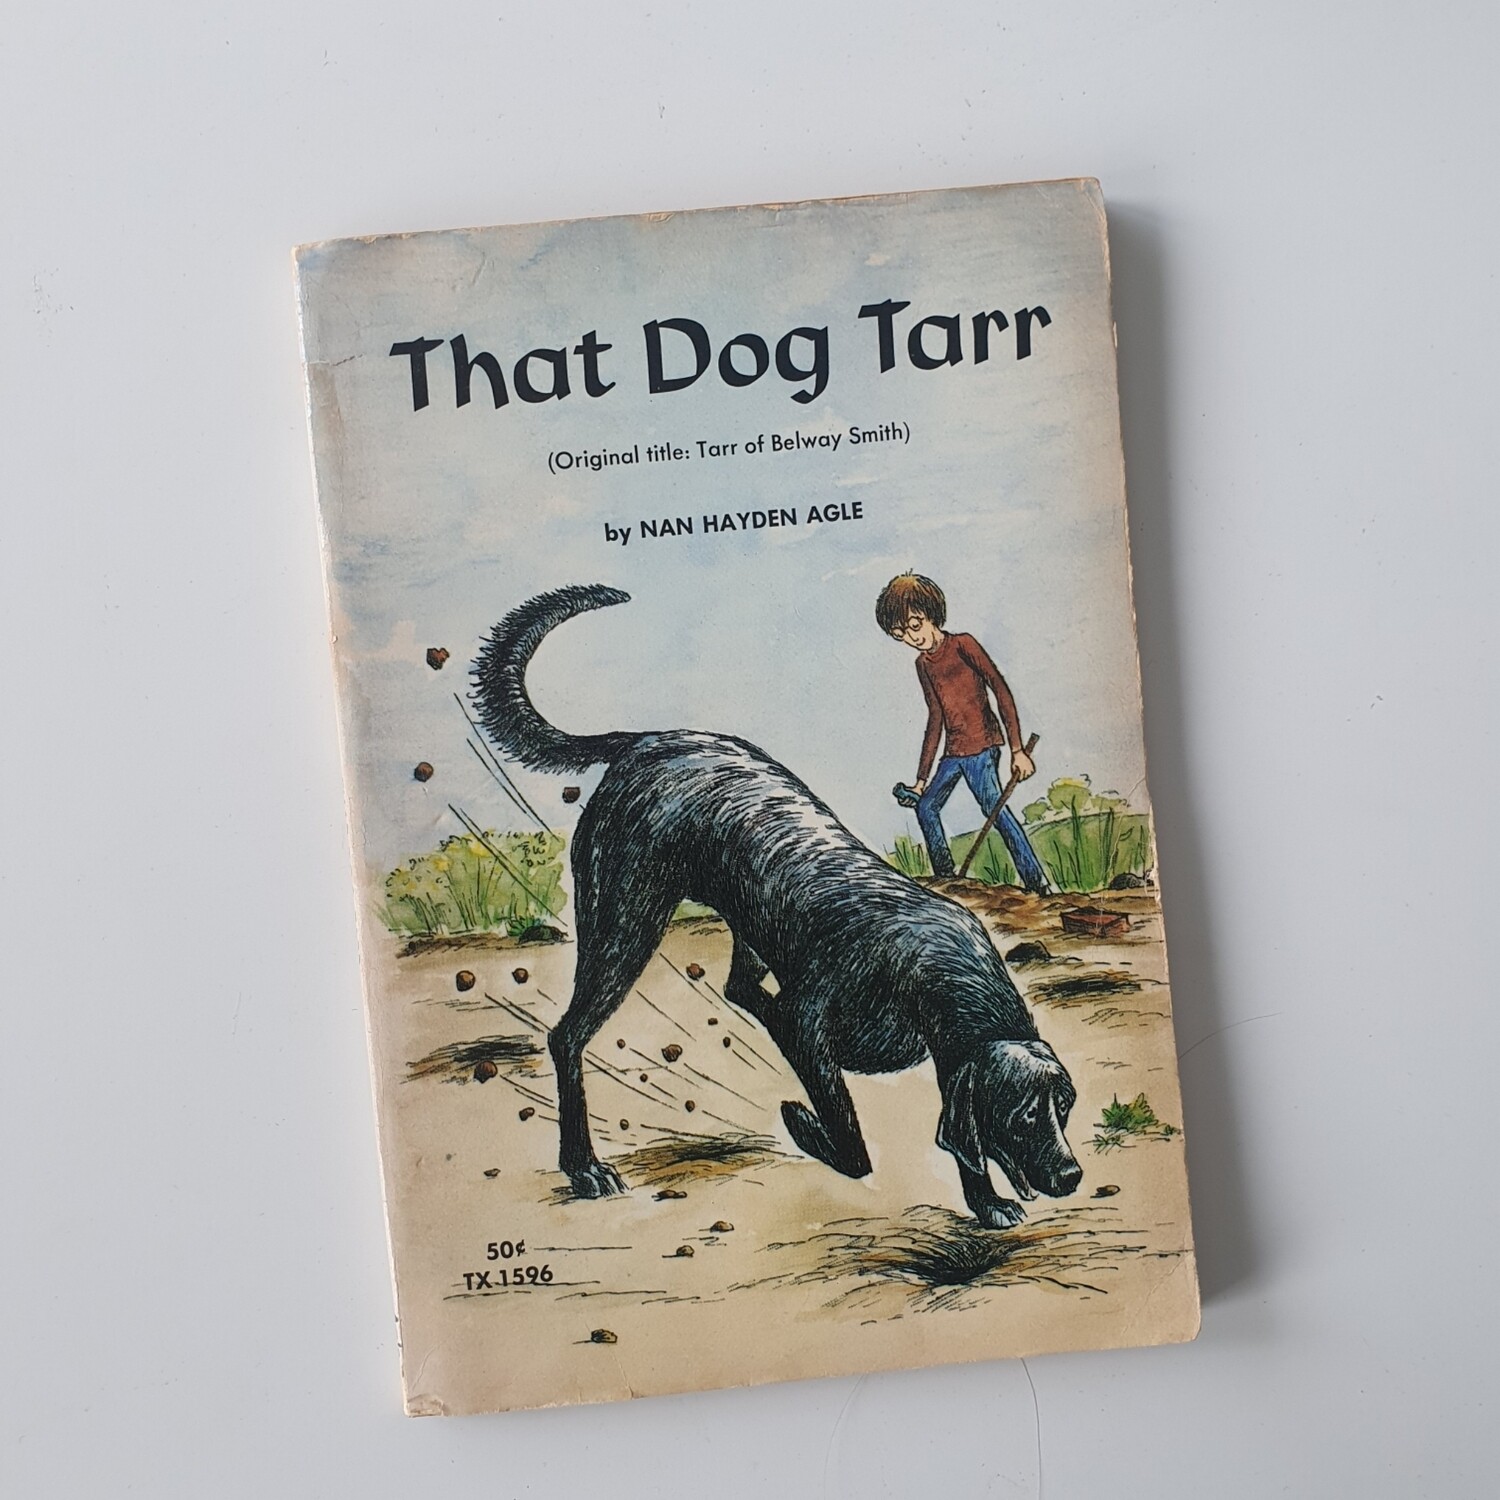 That Dog Tarr - Black labrador, 1973 - made from a paperback book